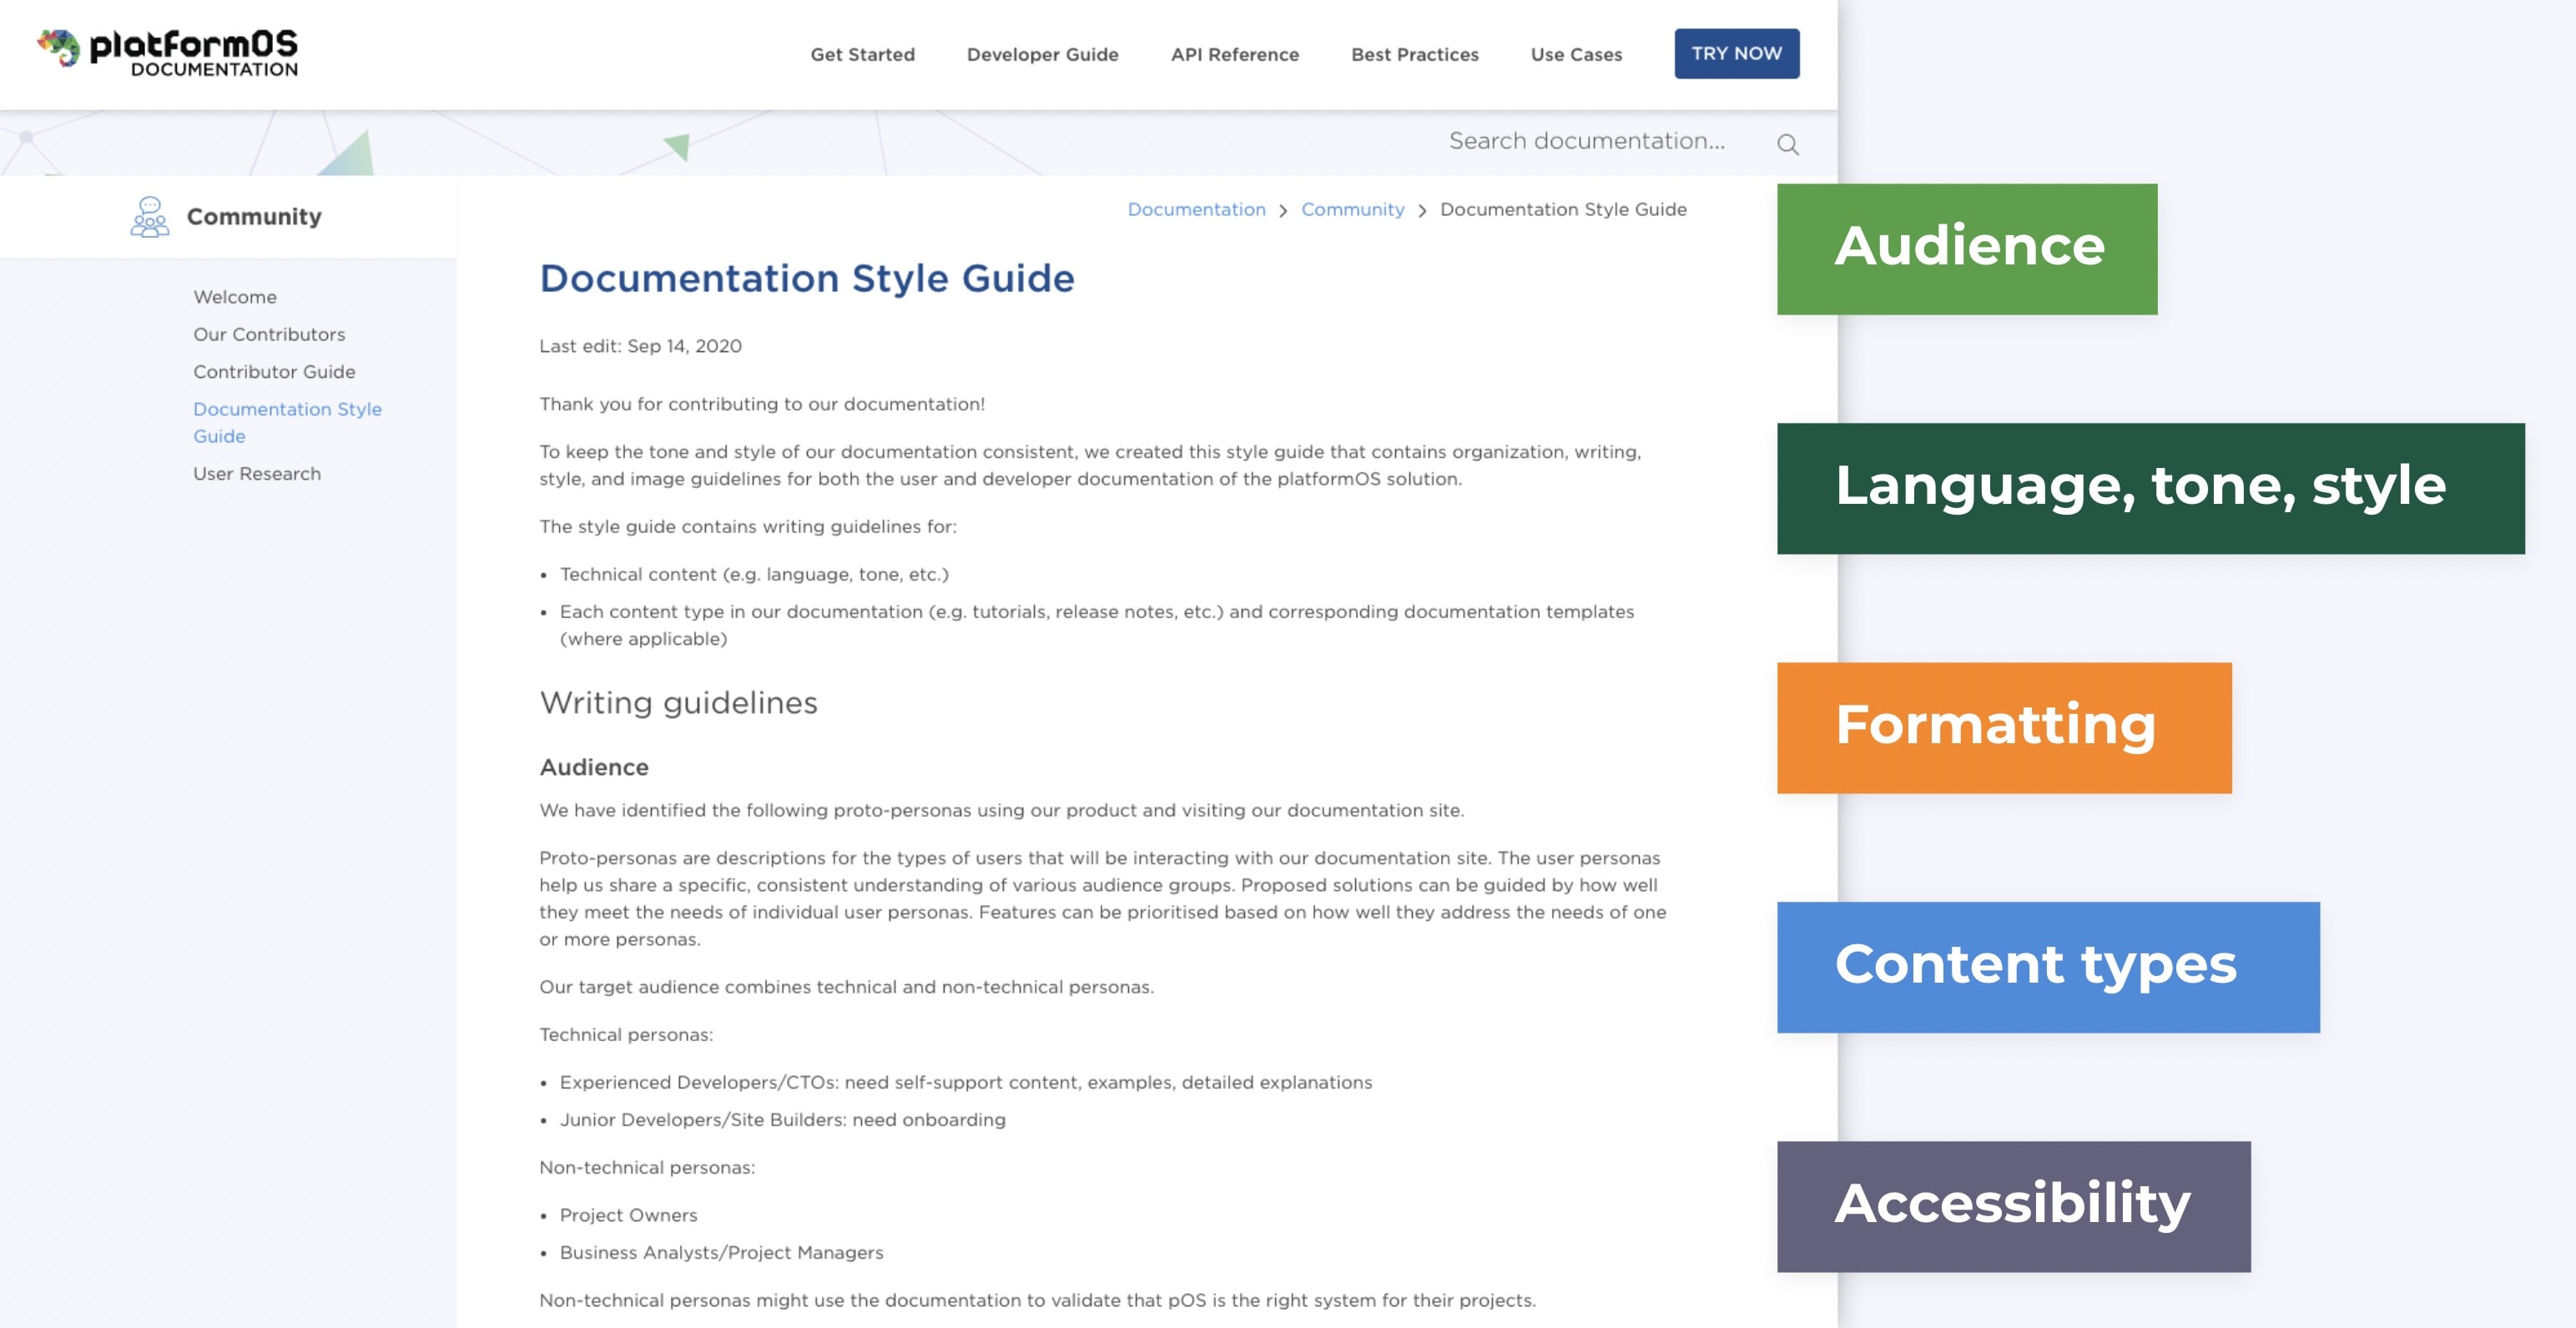 A screenshot of our Documentation Style Guide